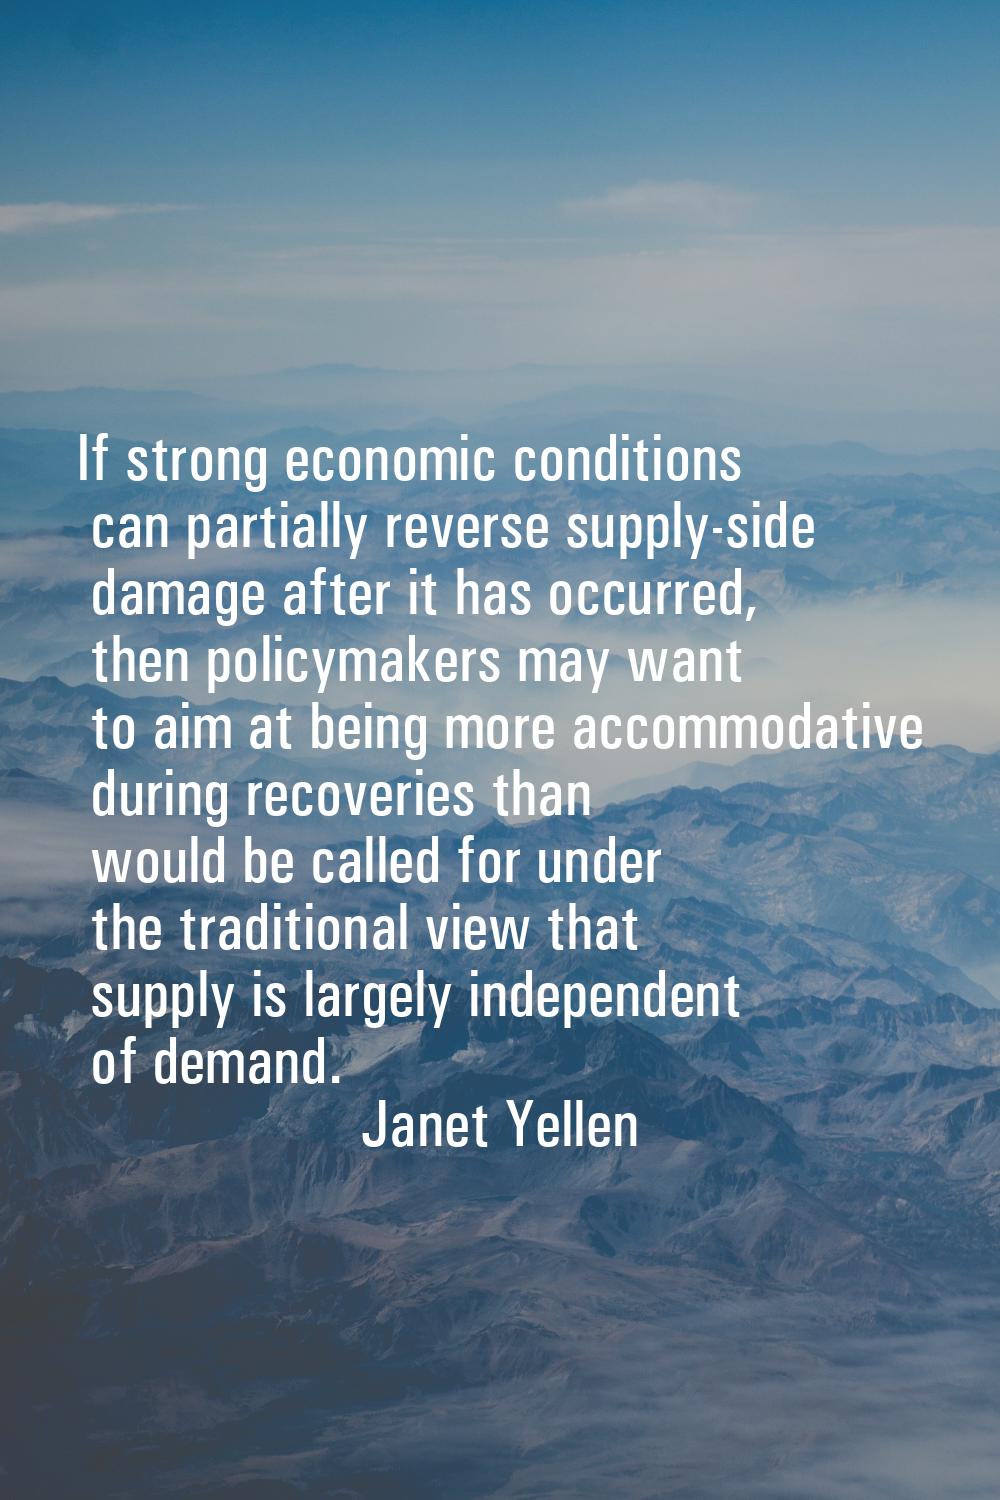 If strong economic conditions can partially reverse supply-side damage after it has occurred, then 